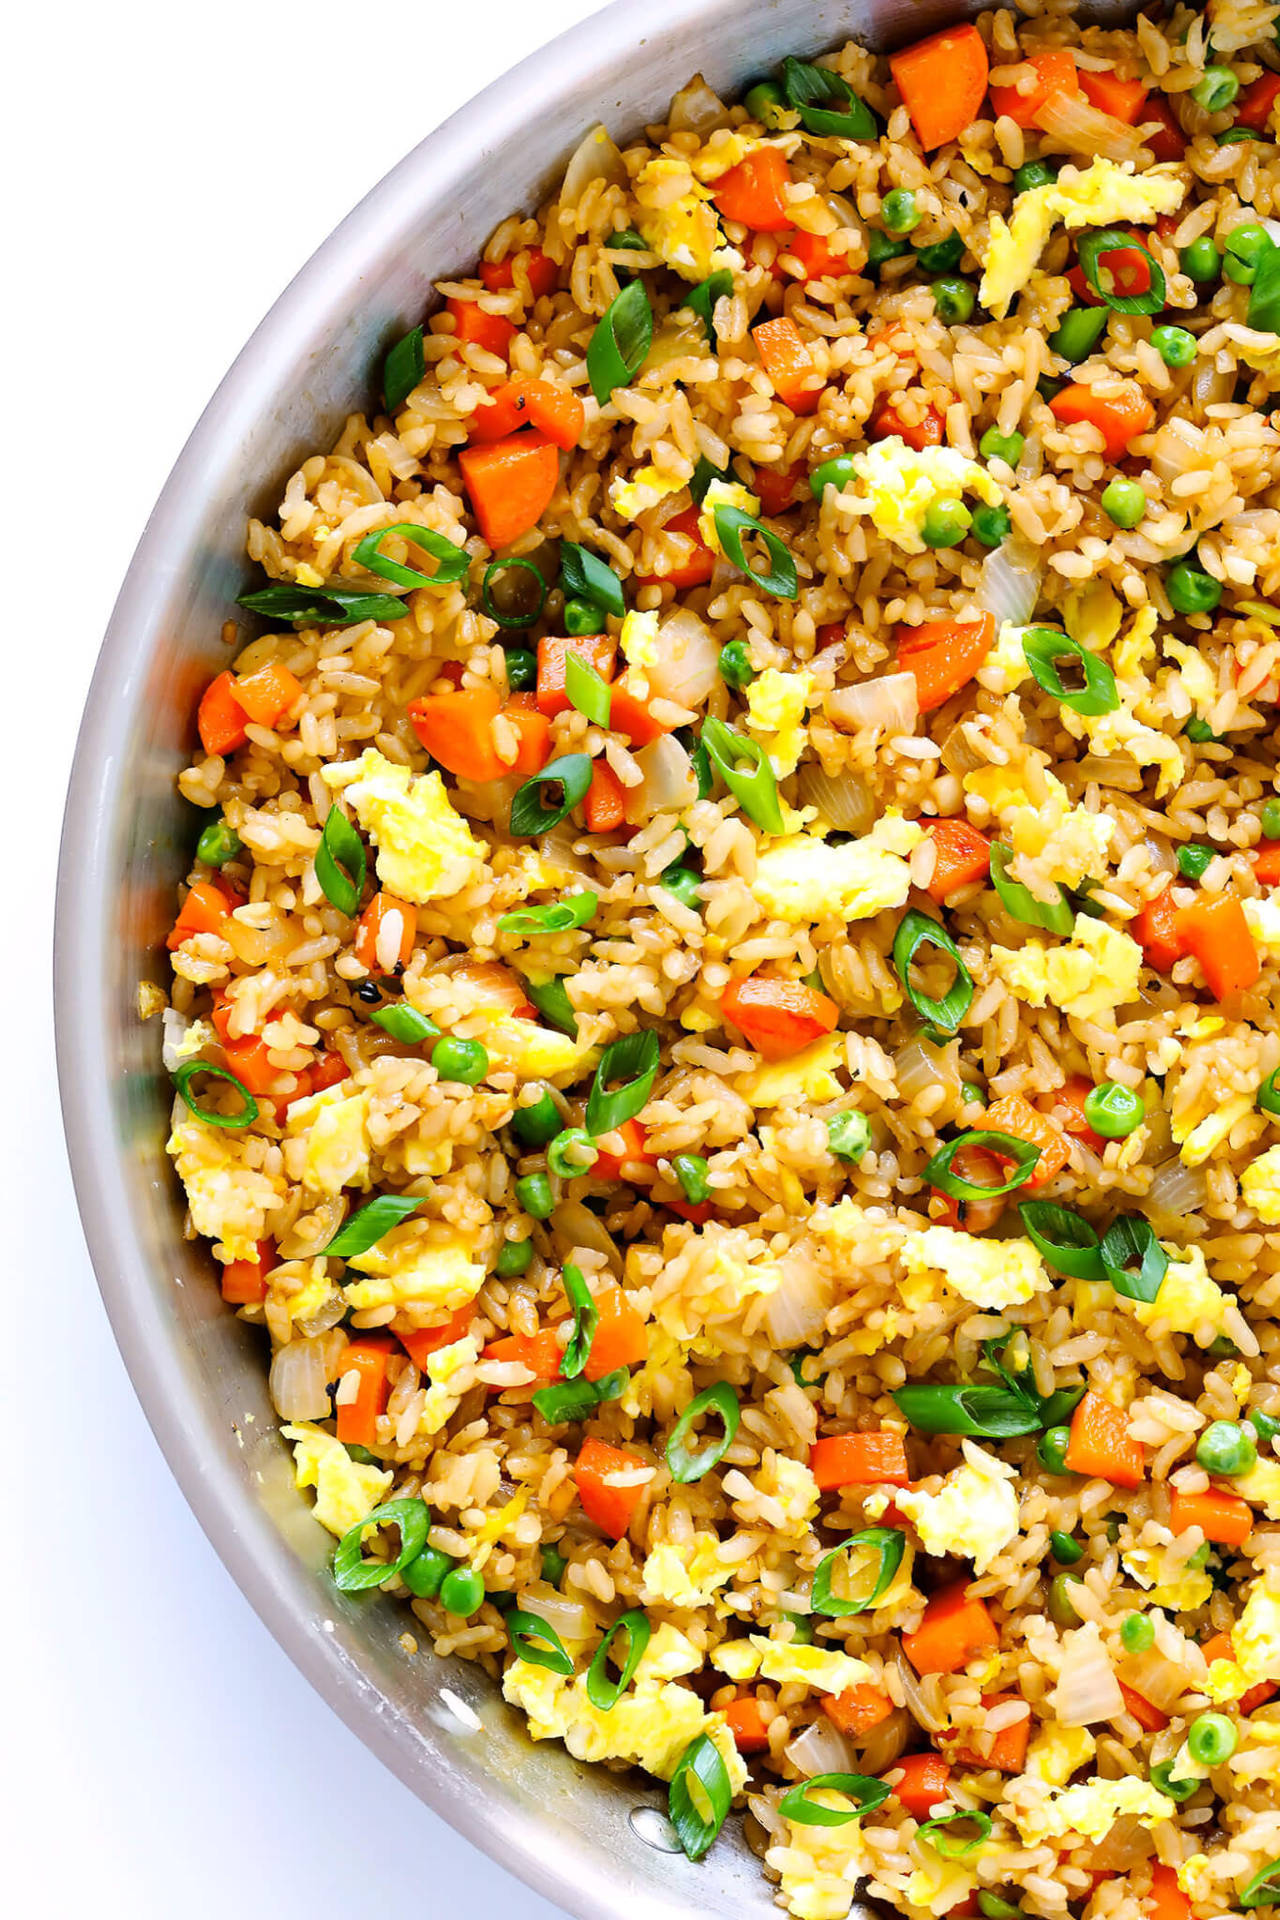 Large Serving Of Fried Rice Wallpaper